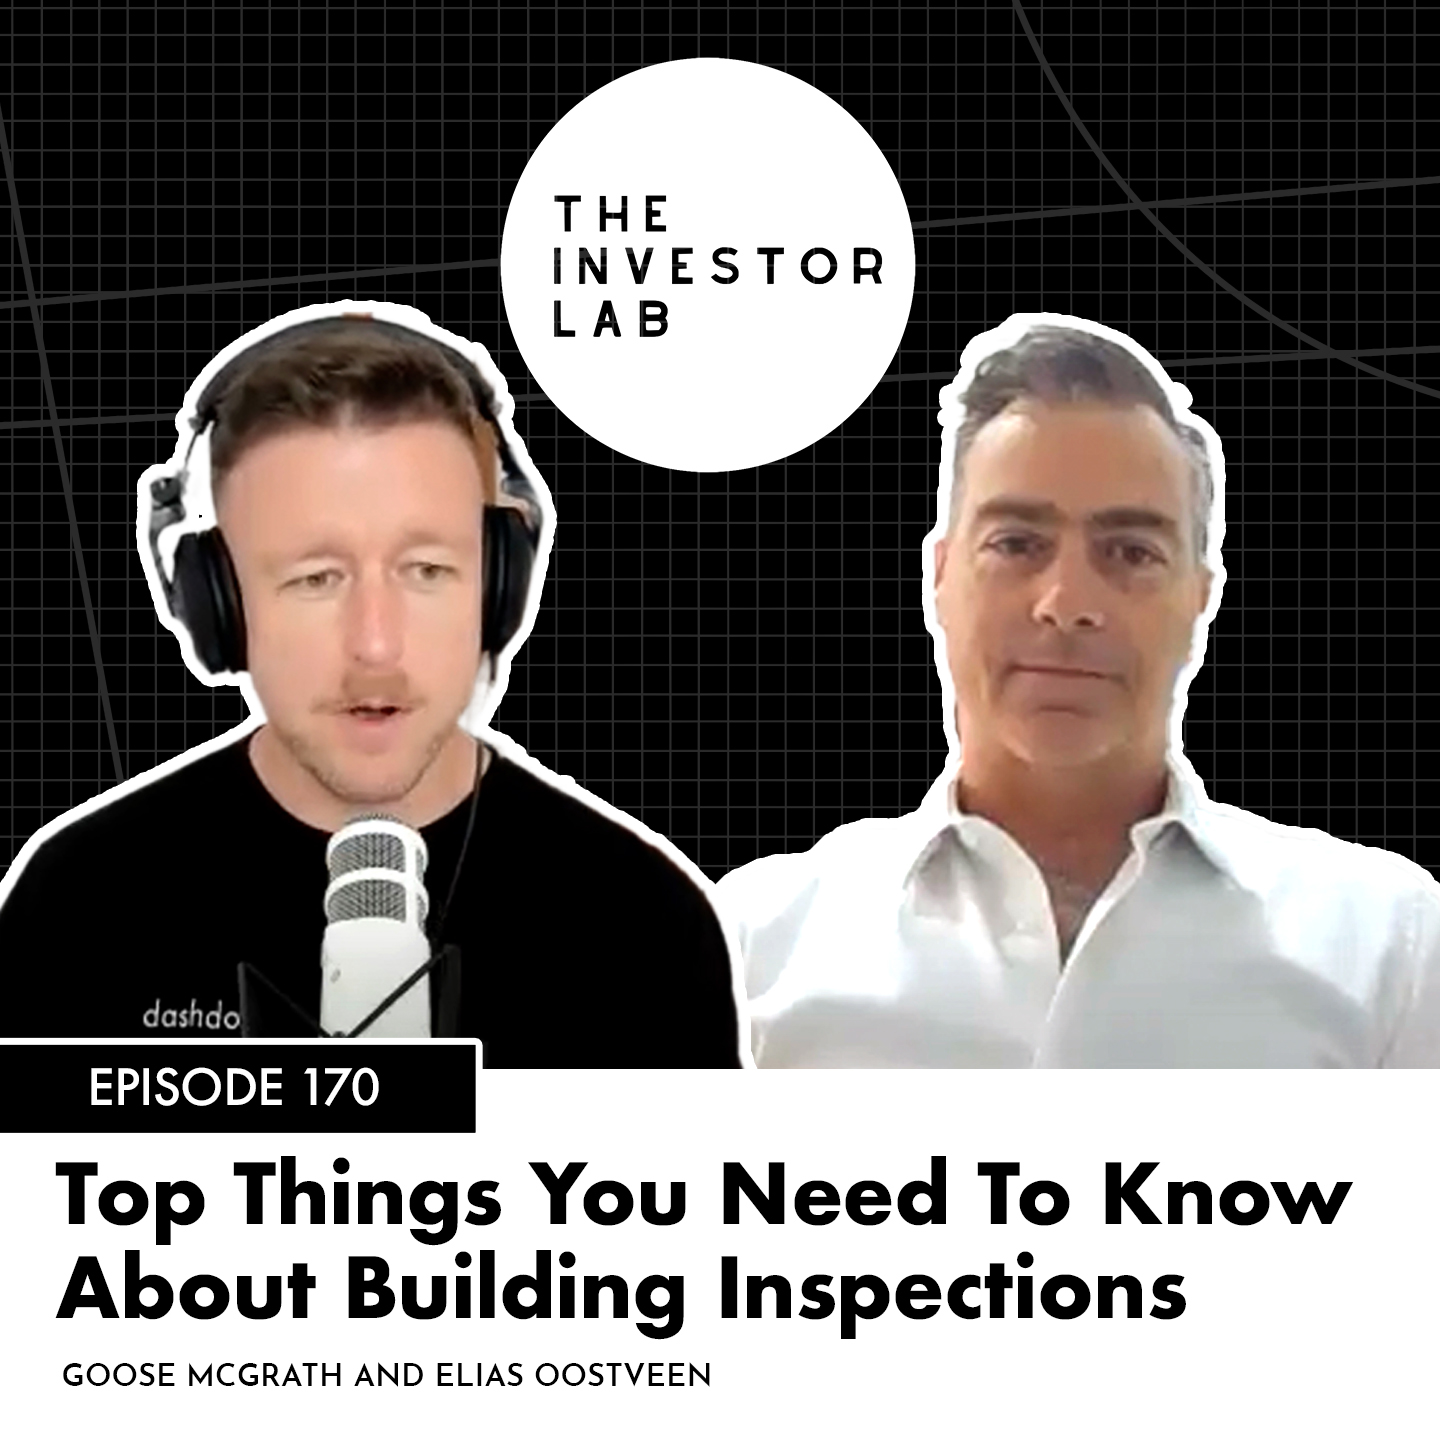 Top Things You Need To Know About Building Inspections with Elias Oostveen